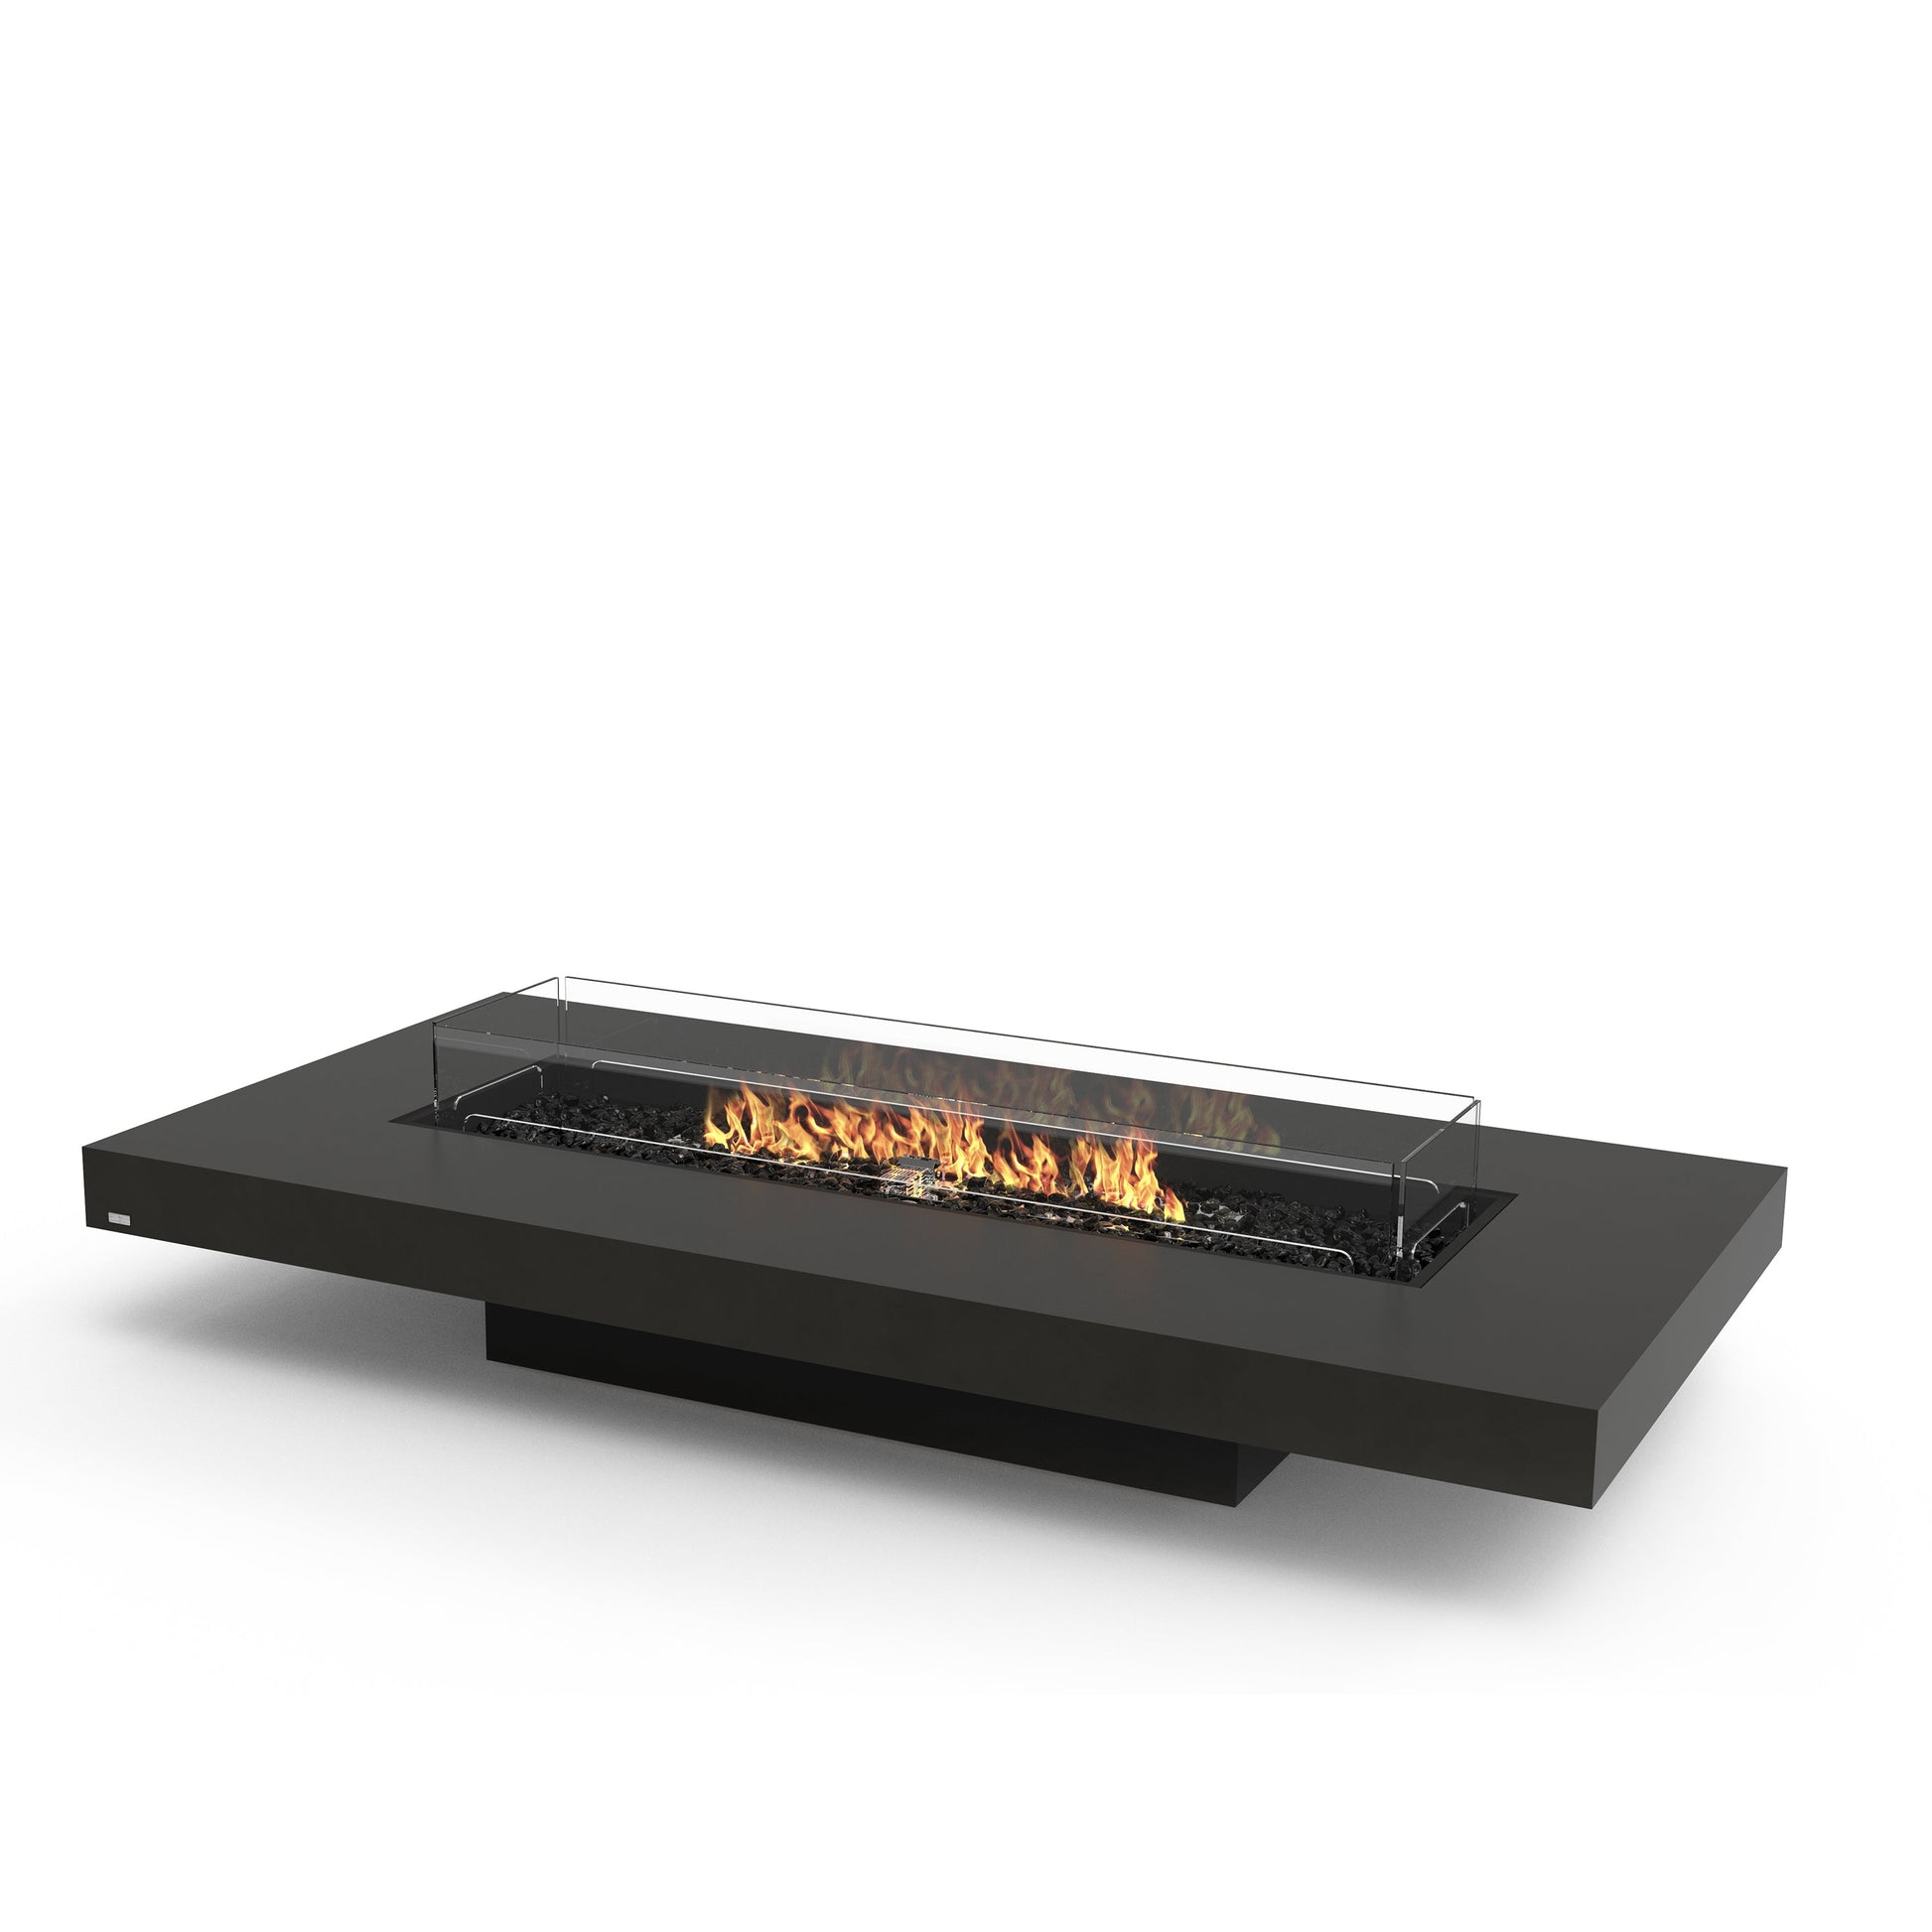 EcoSmart Fire 89" Gin 90 Low Height Fire Pit Table with Gas LP/NG Burner by Mad Design Group